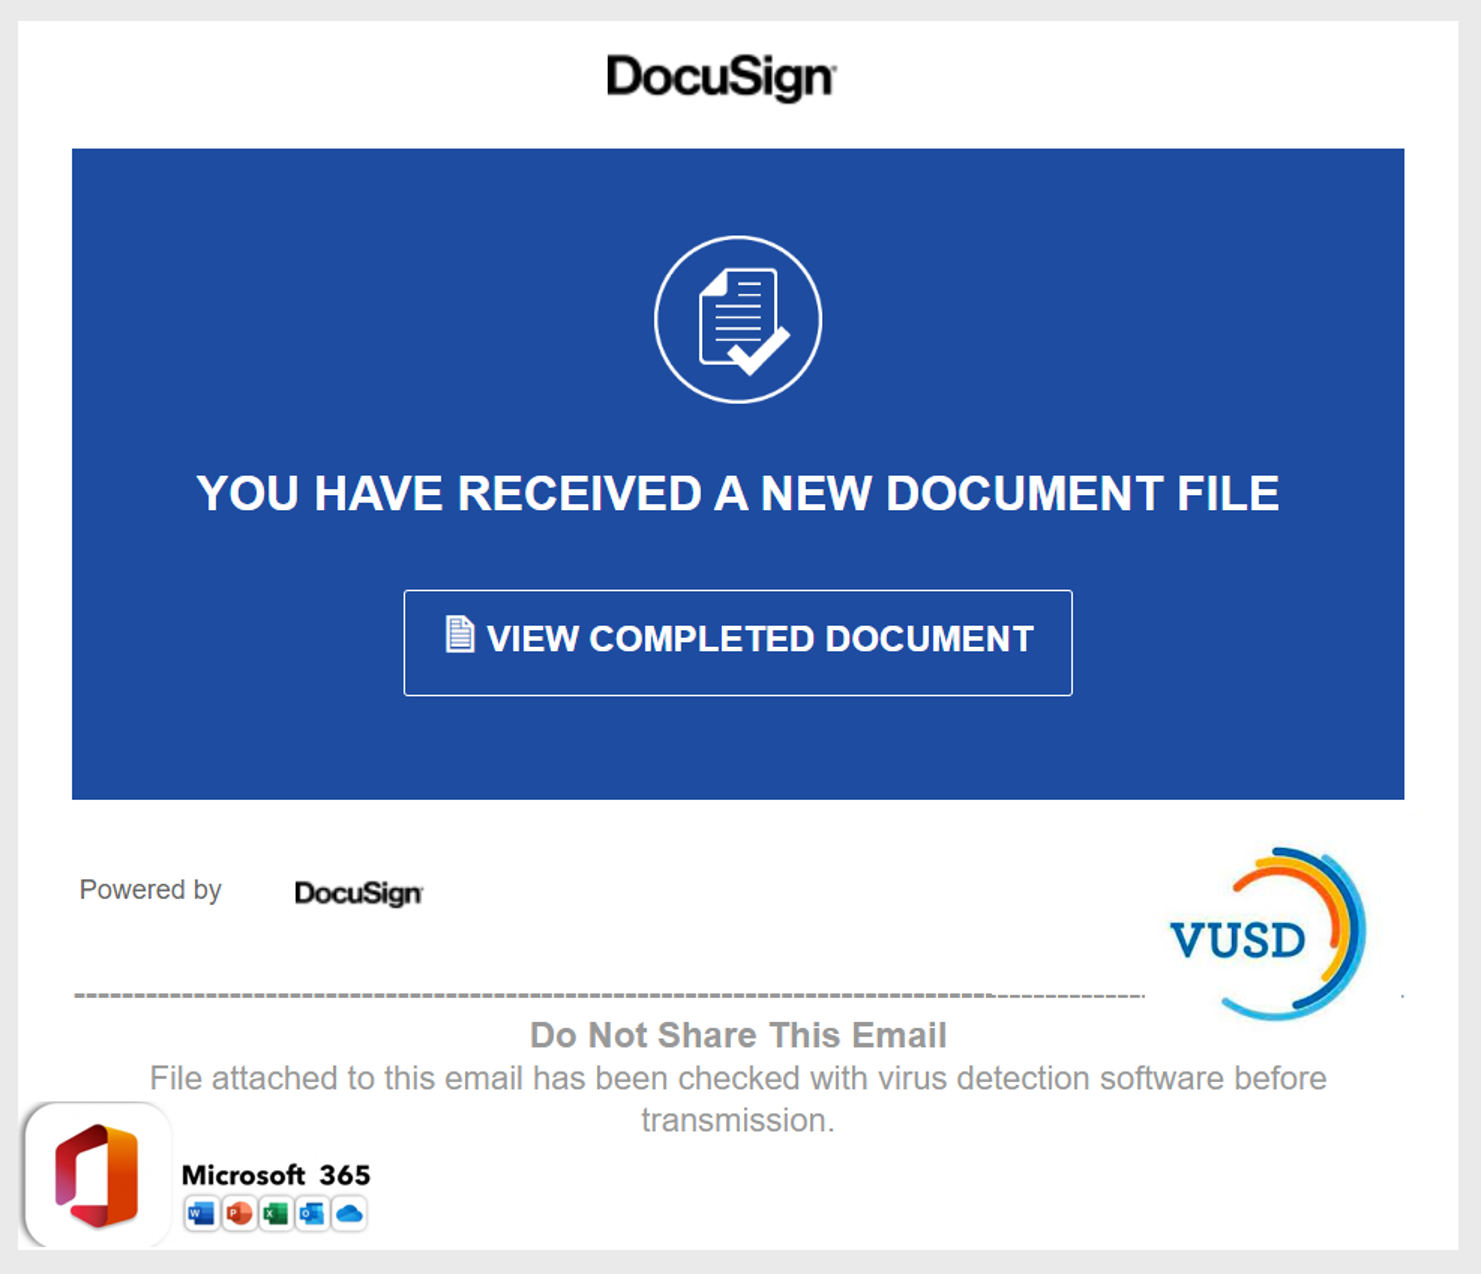 A fake DocuSign-branded notification stating "YOU HAVE RECEIVED A NEW DOCUMENT FILE"